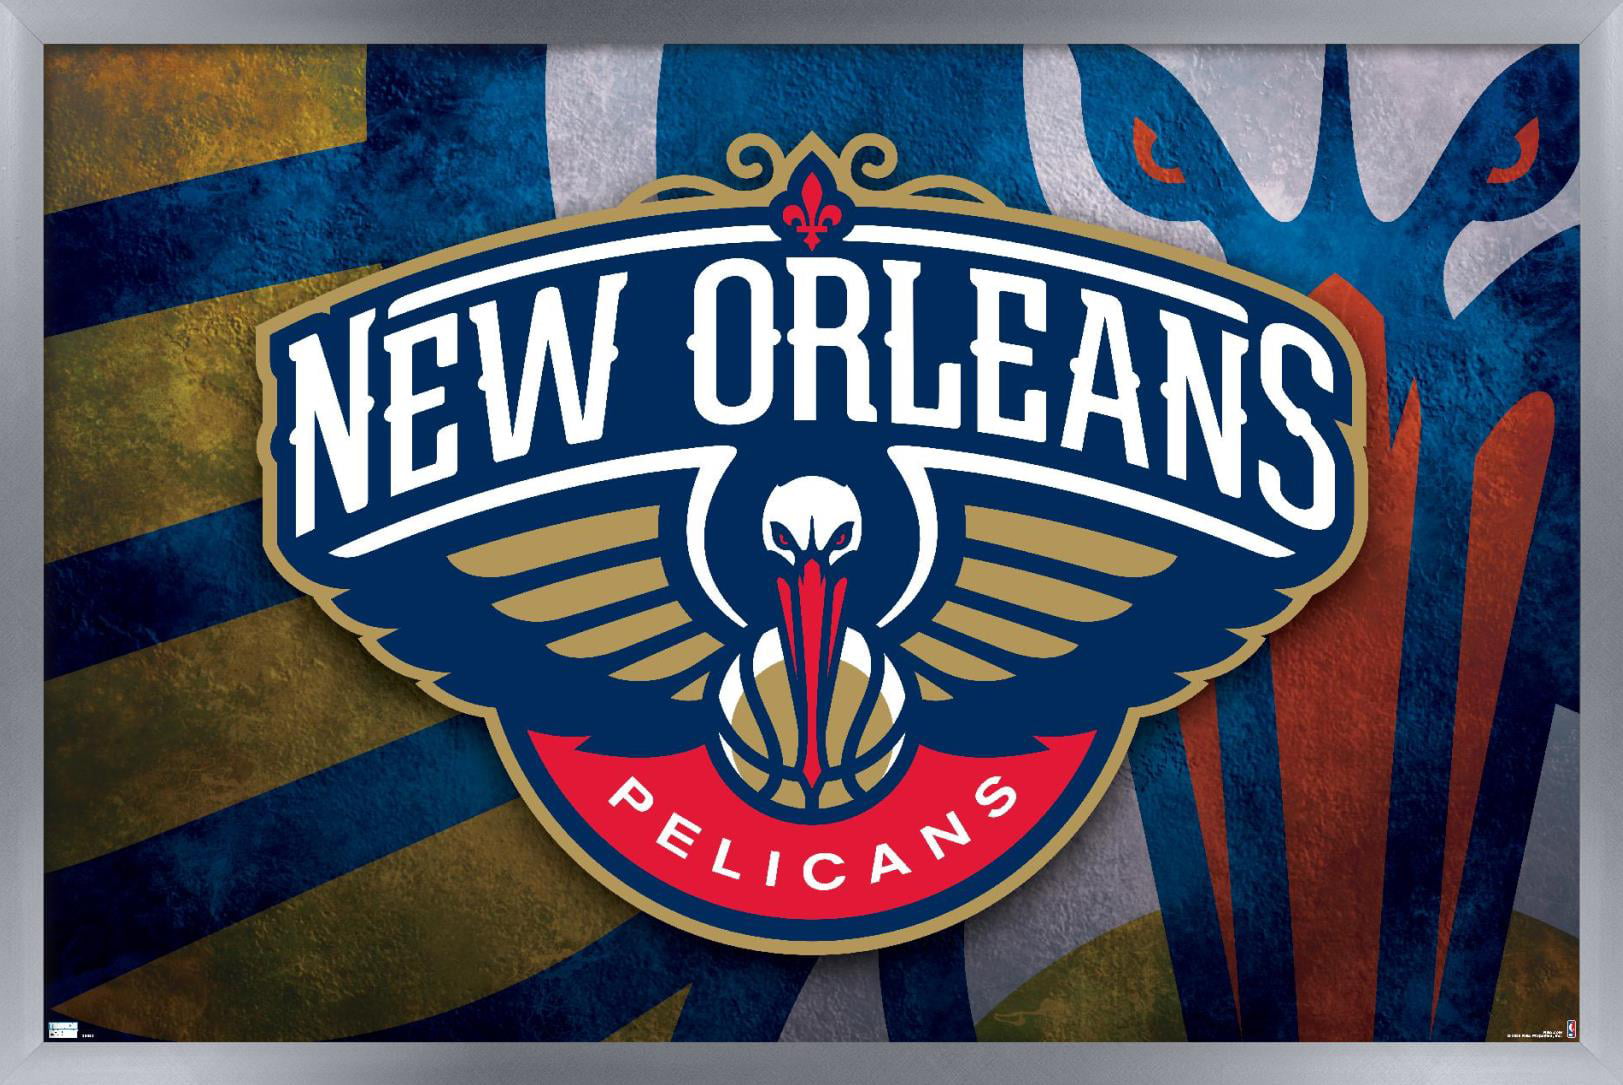 NBA New Orleans Pelicans - Logo 20 Wall Poster, 22.375 x 34